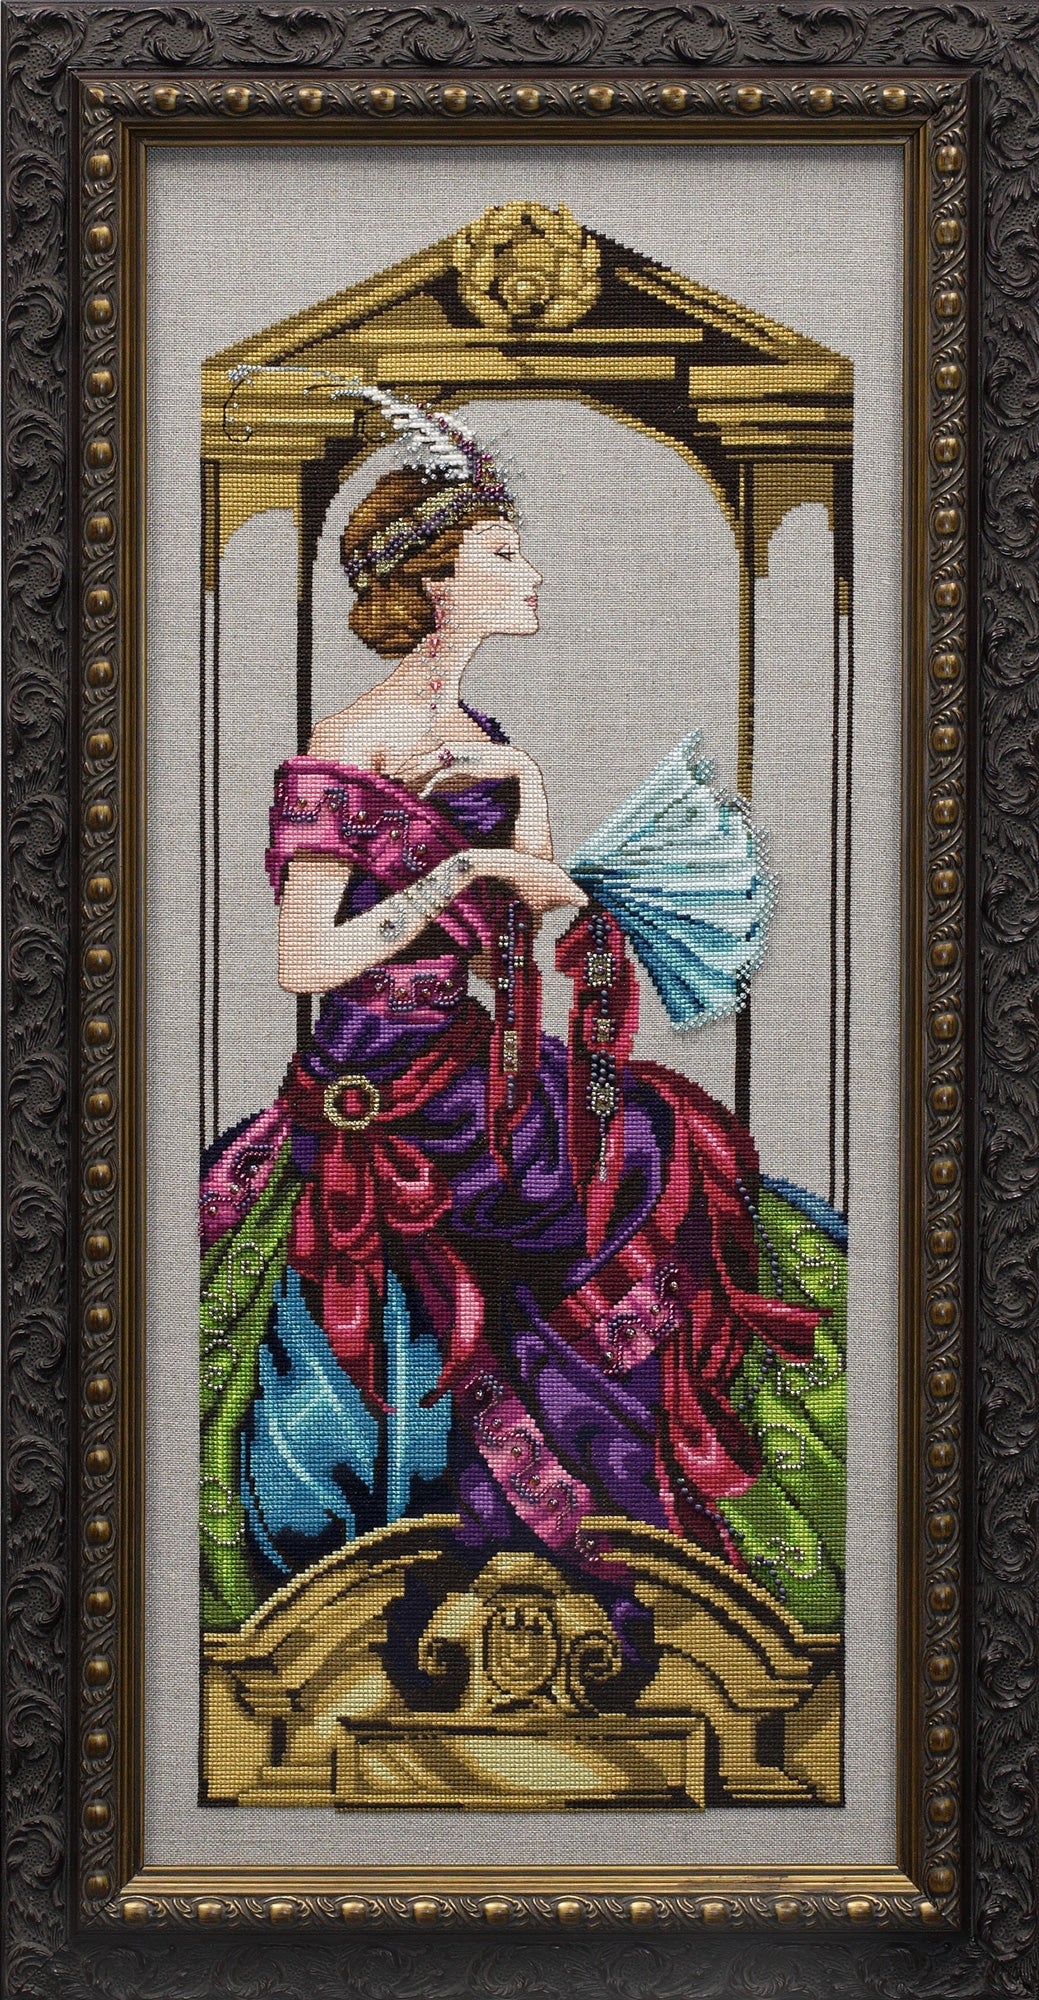 COMPLETE XSTITCH MATERIALS "VENETIAN OPULENCE MD99" by Mirabilia